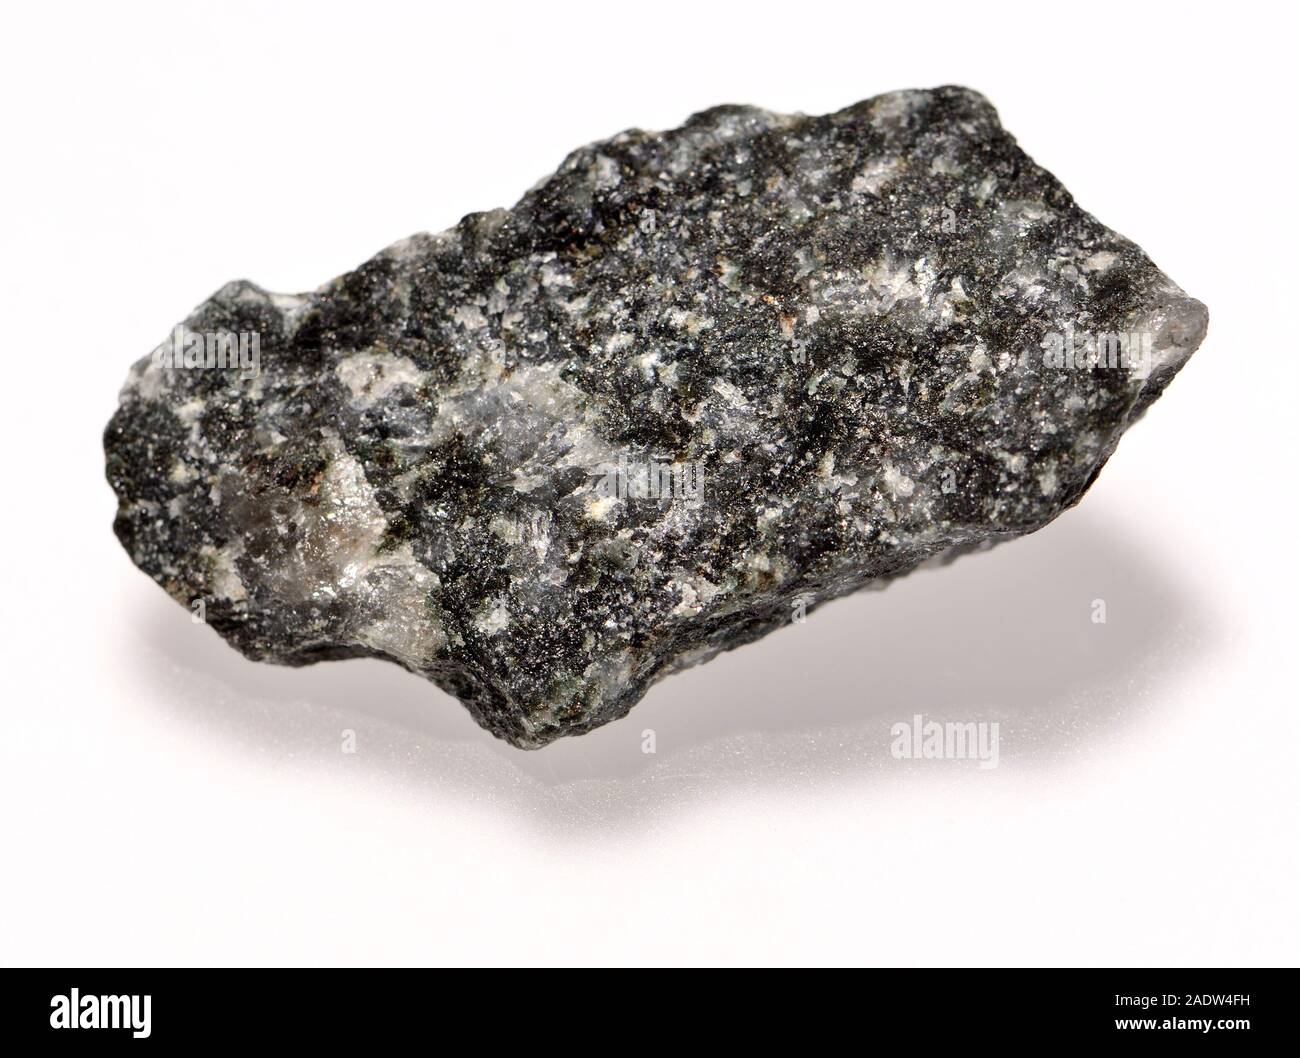 Gabbro - coarse-grained, intrusive igneous rock formed from the slow cooling of magnesium-rich and iron-rich magma Stock Photo